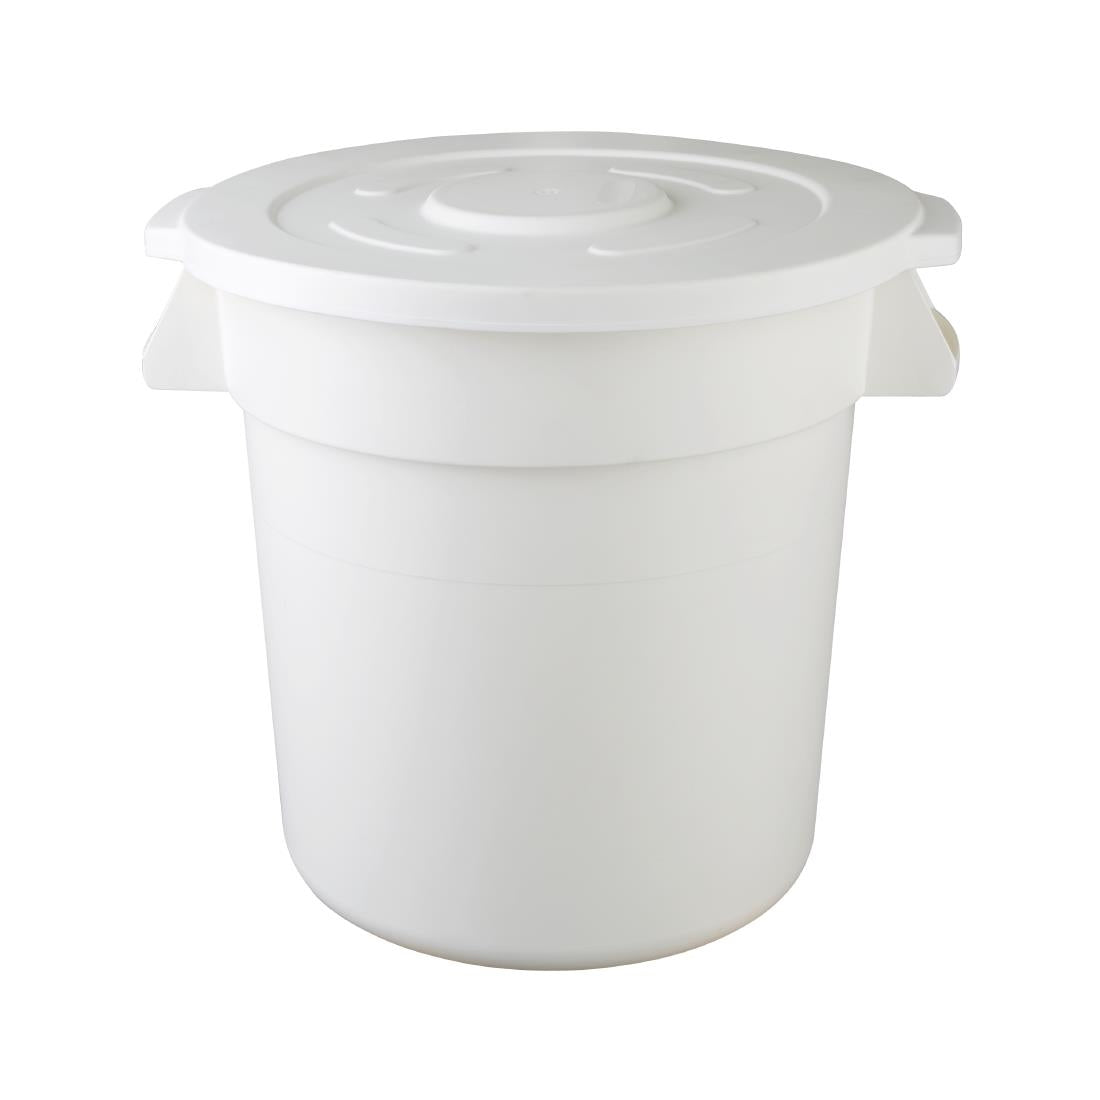 GG793 Vogue Polypropylene Round Container Bin White 76Ltr JD Catering Equipment Solutions Ltd